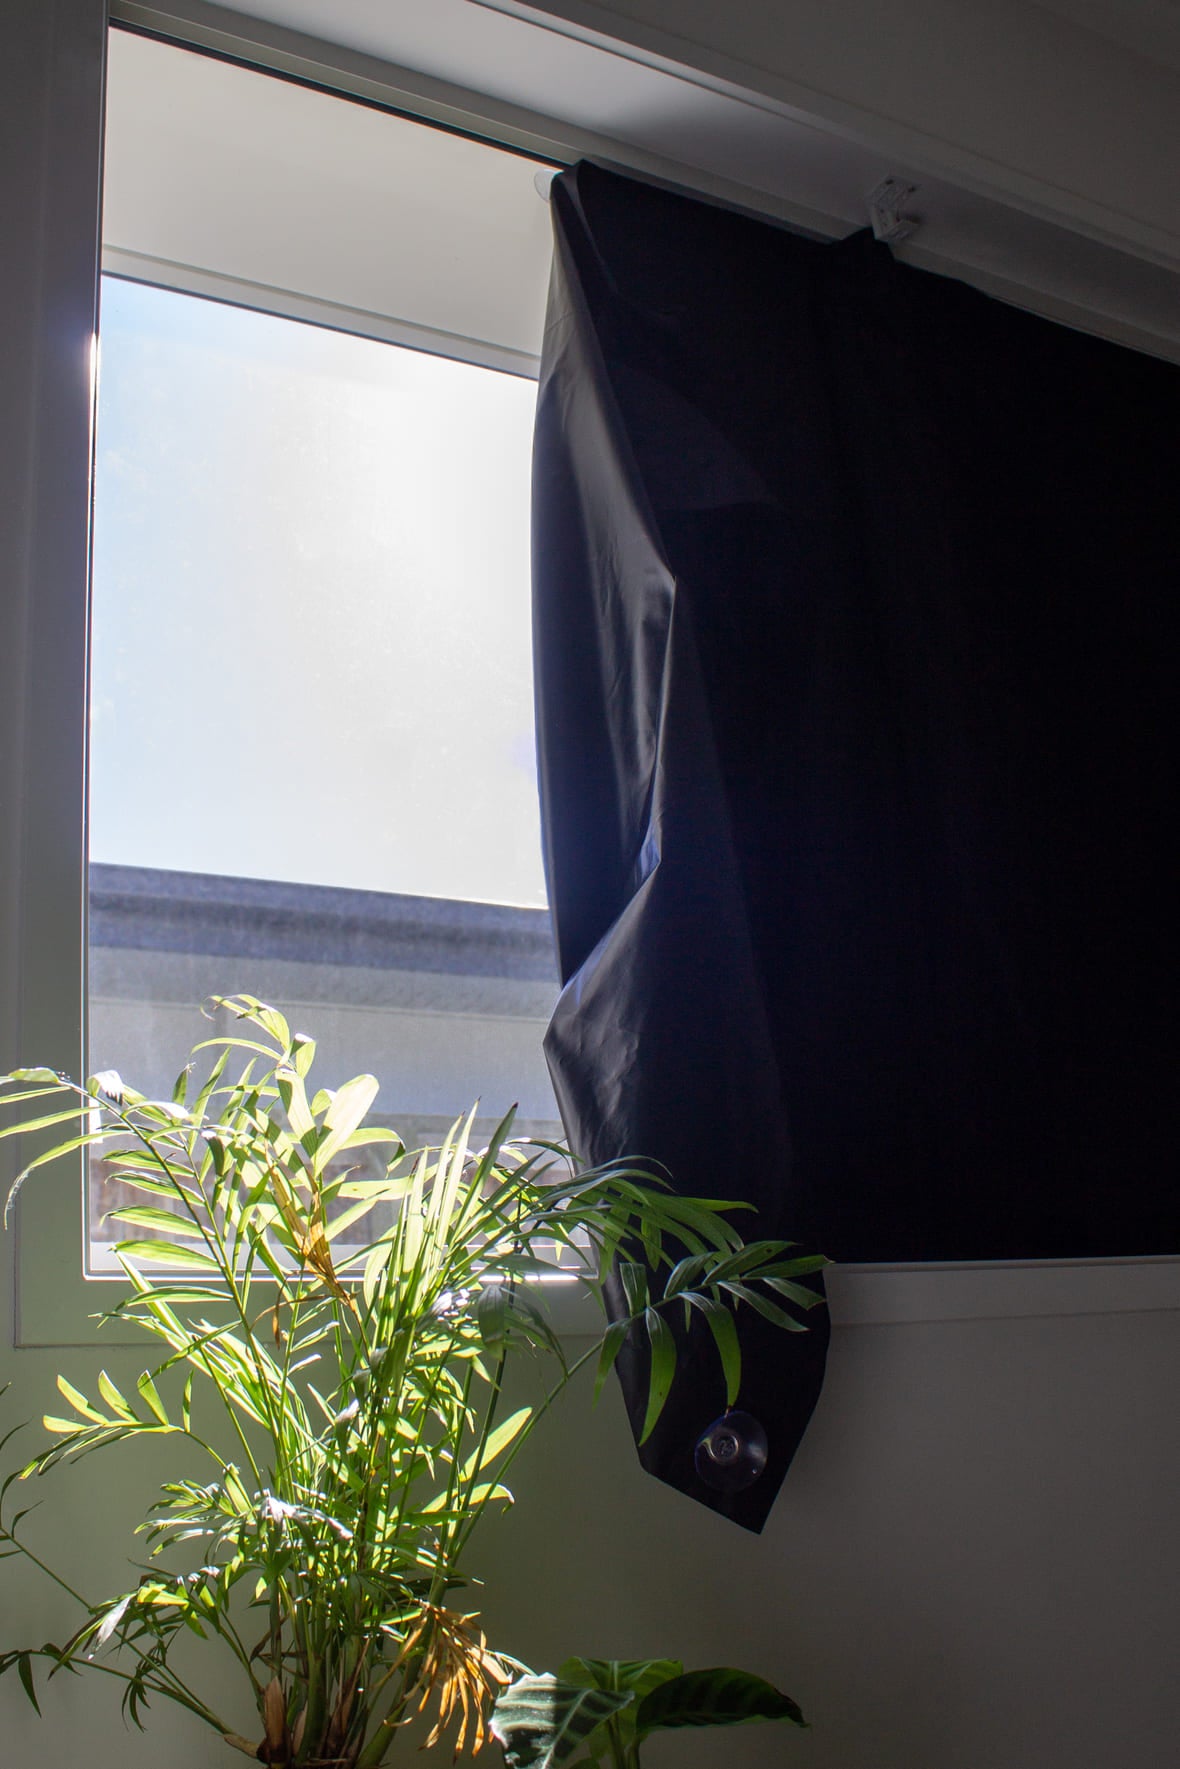 My Blackout® Portable Blind installed on the window